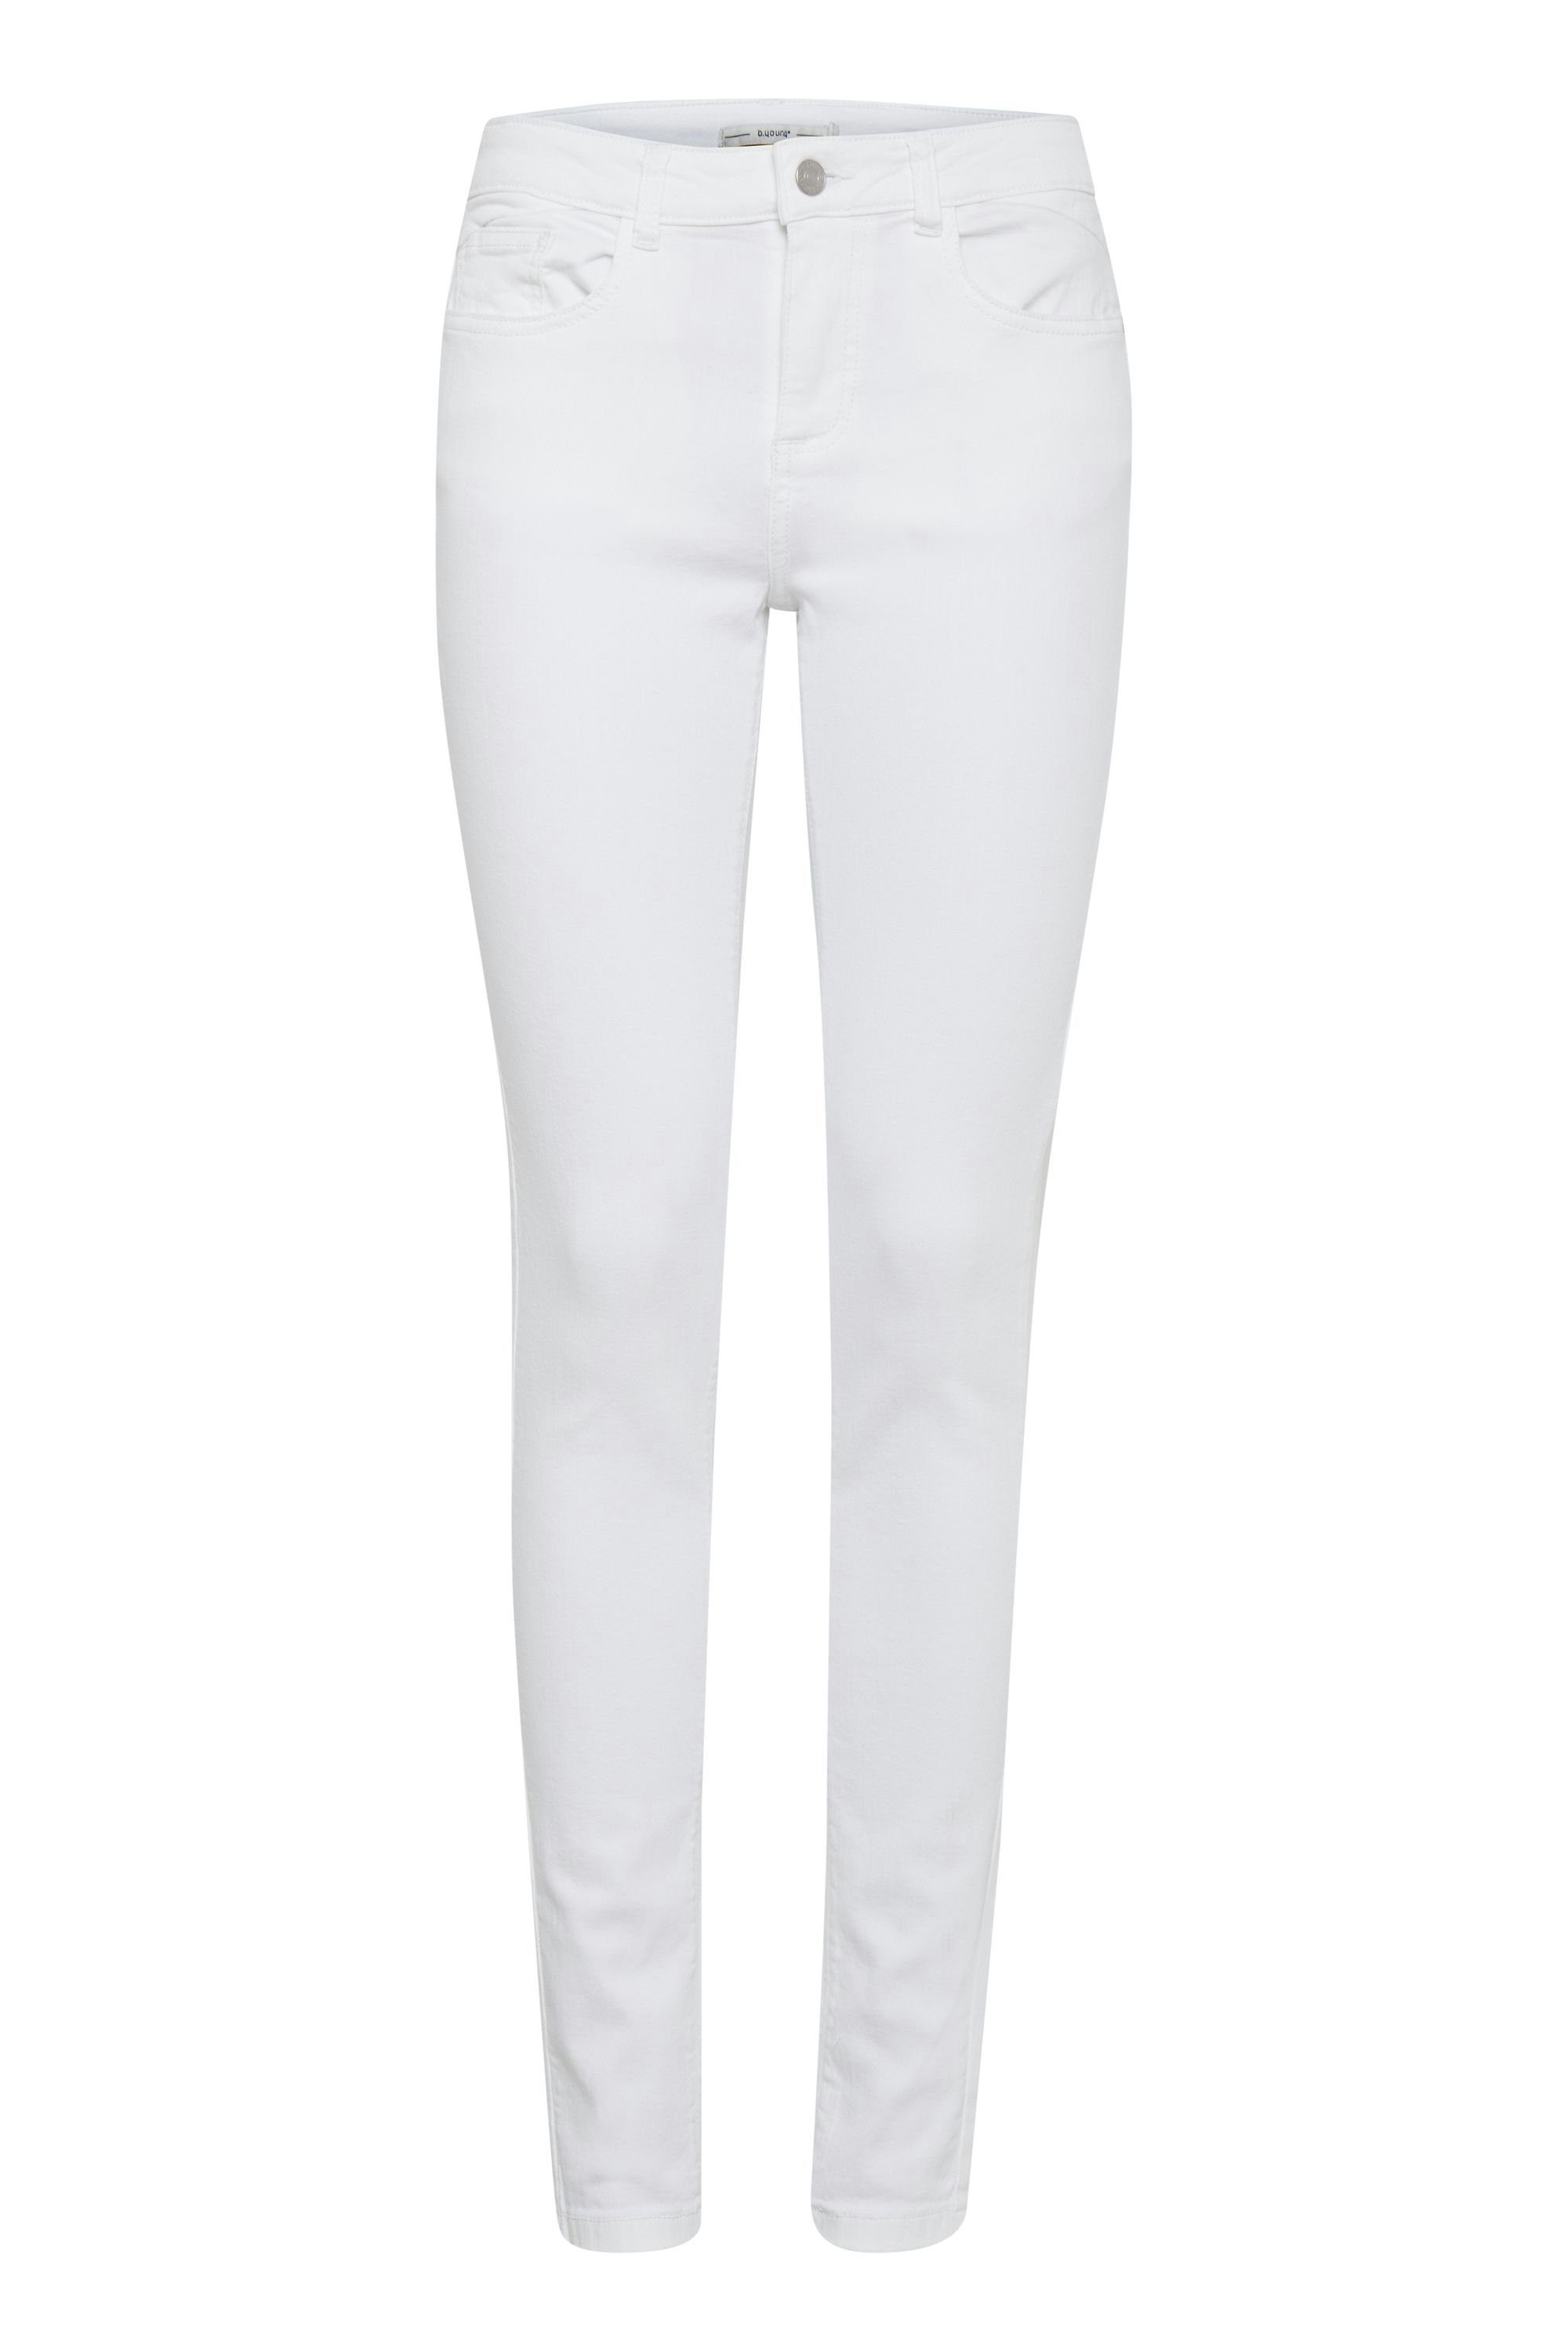 b.young Skinny-fit-Jeans BYLola Luni (80100) - jeans White Optical 20803214